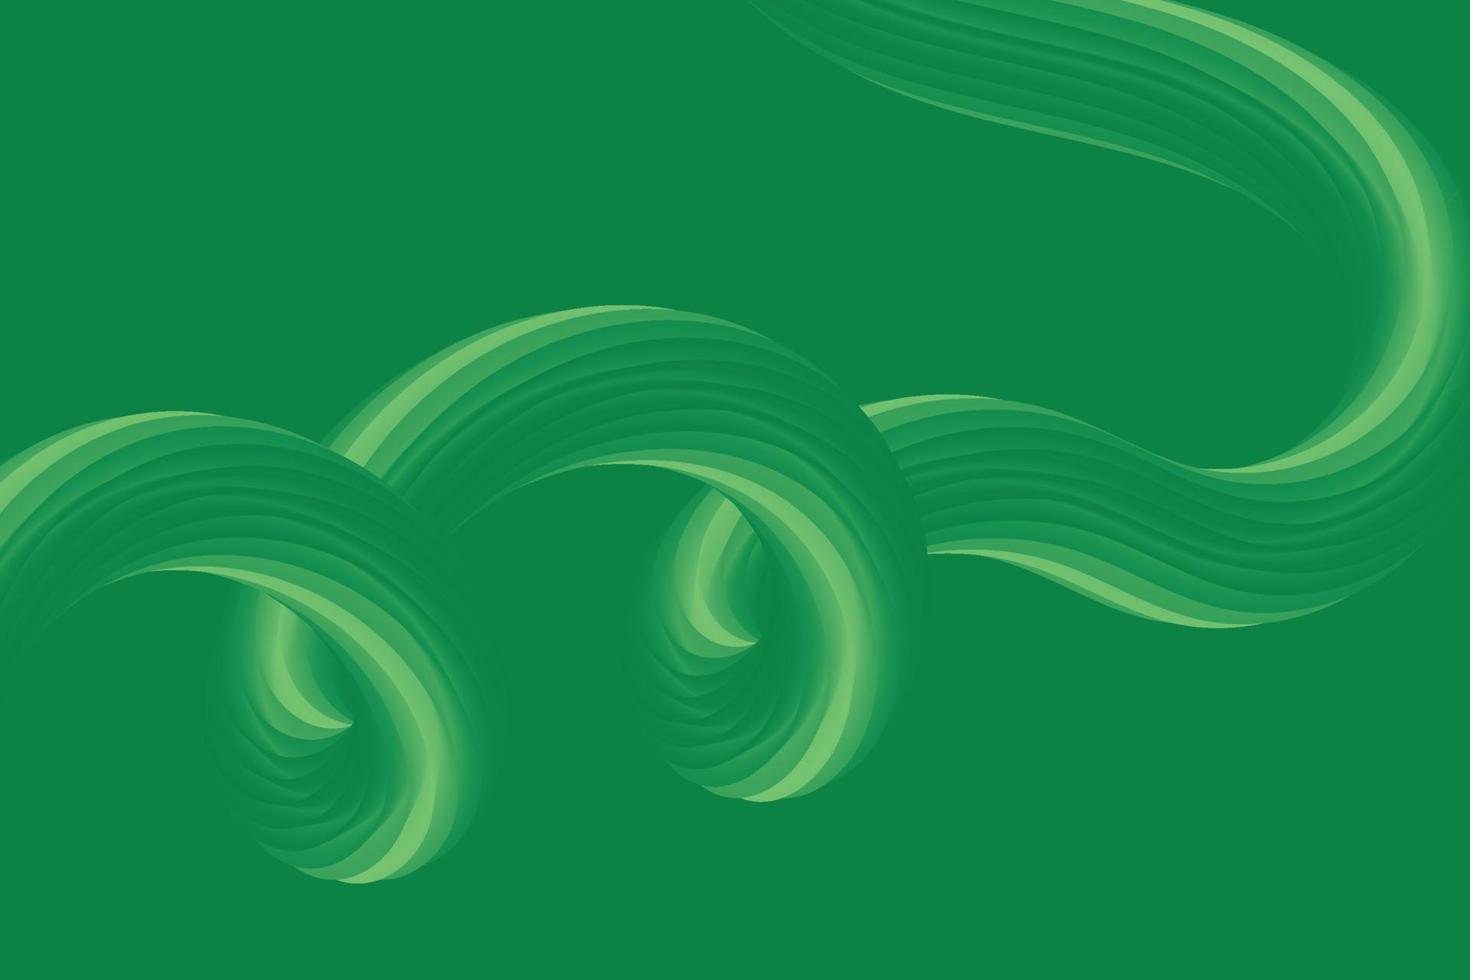 modern green abstract background illustration with wave vector